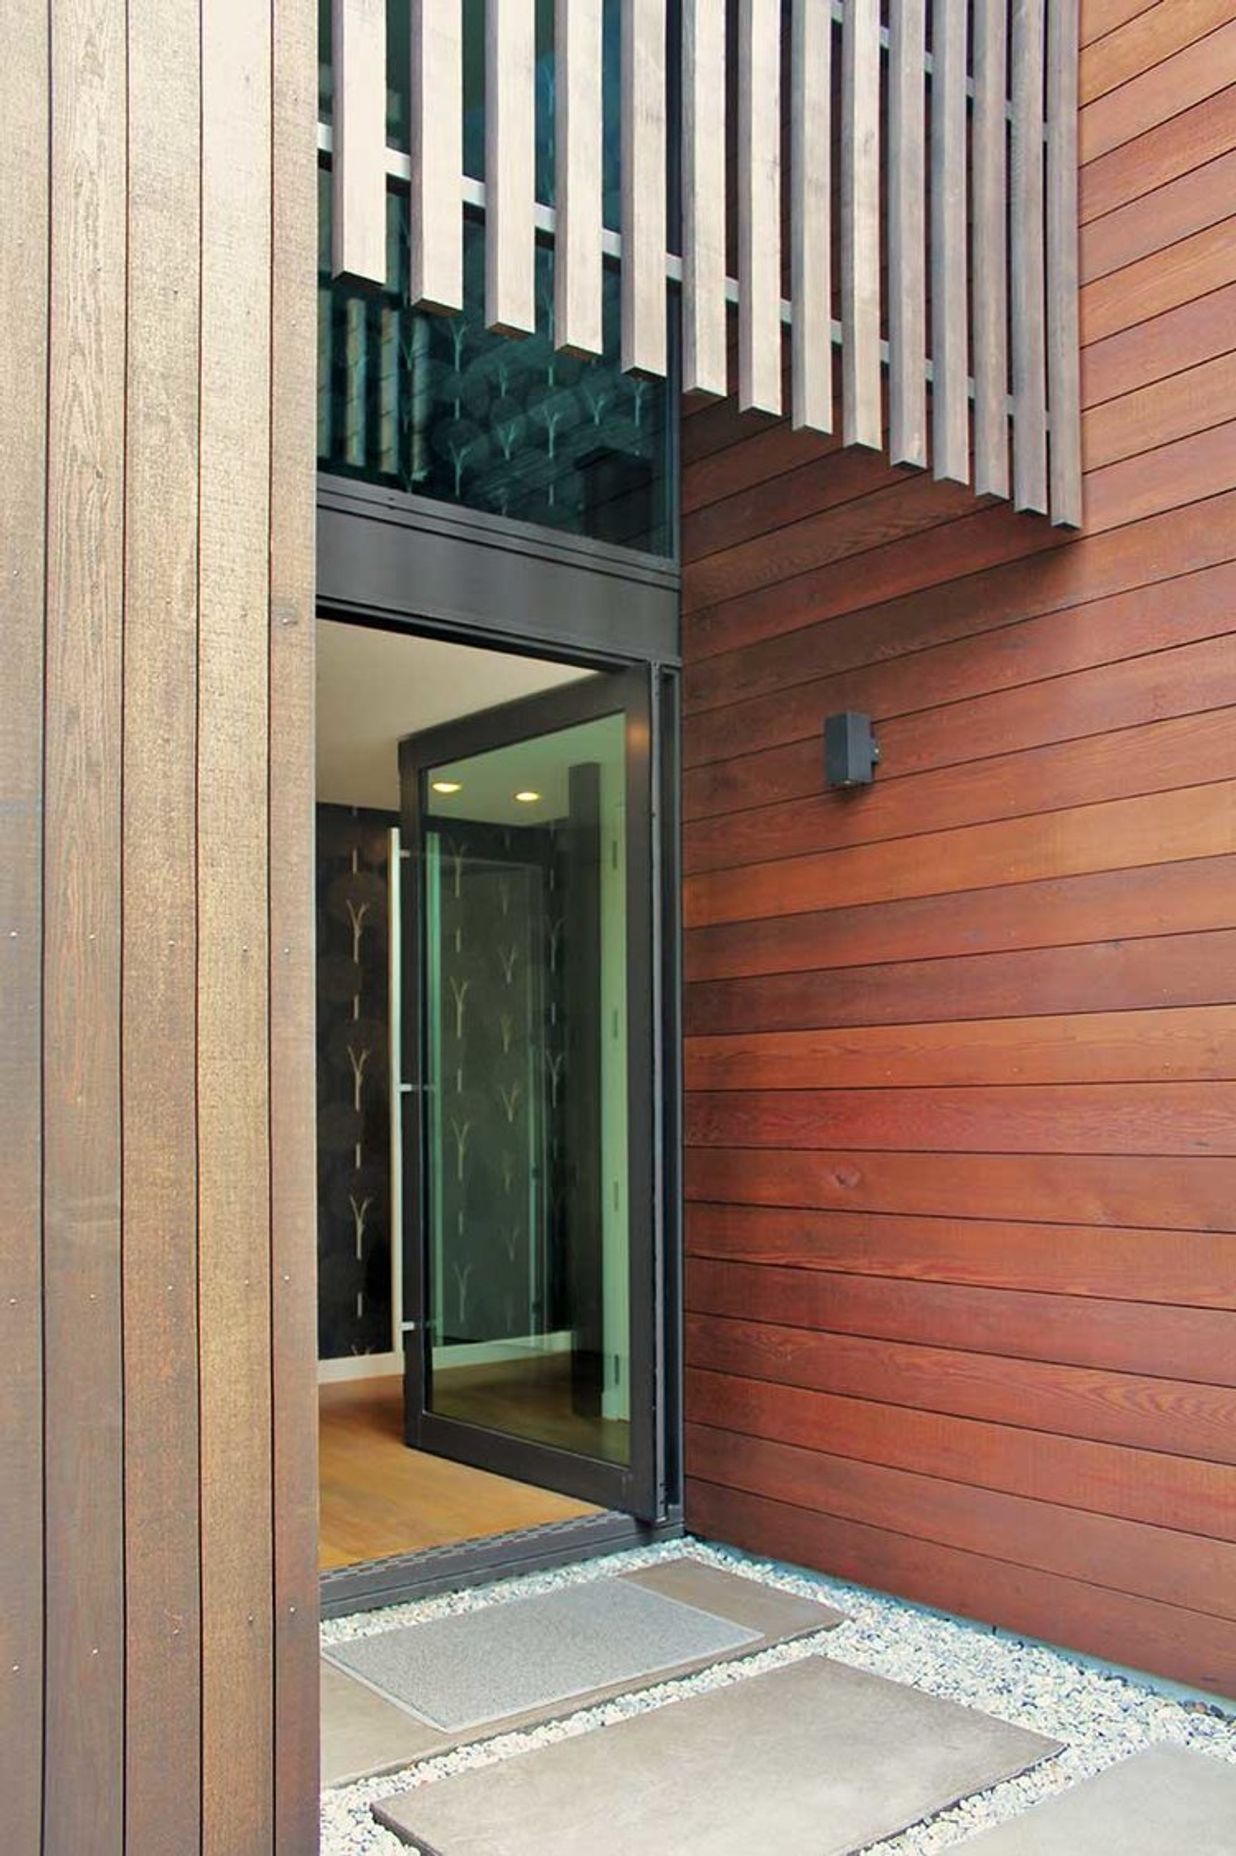 A double height glazed entry lets light penetrate the central hallway or circulation zone.